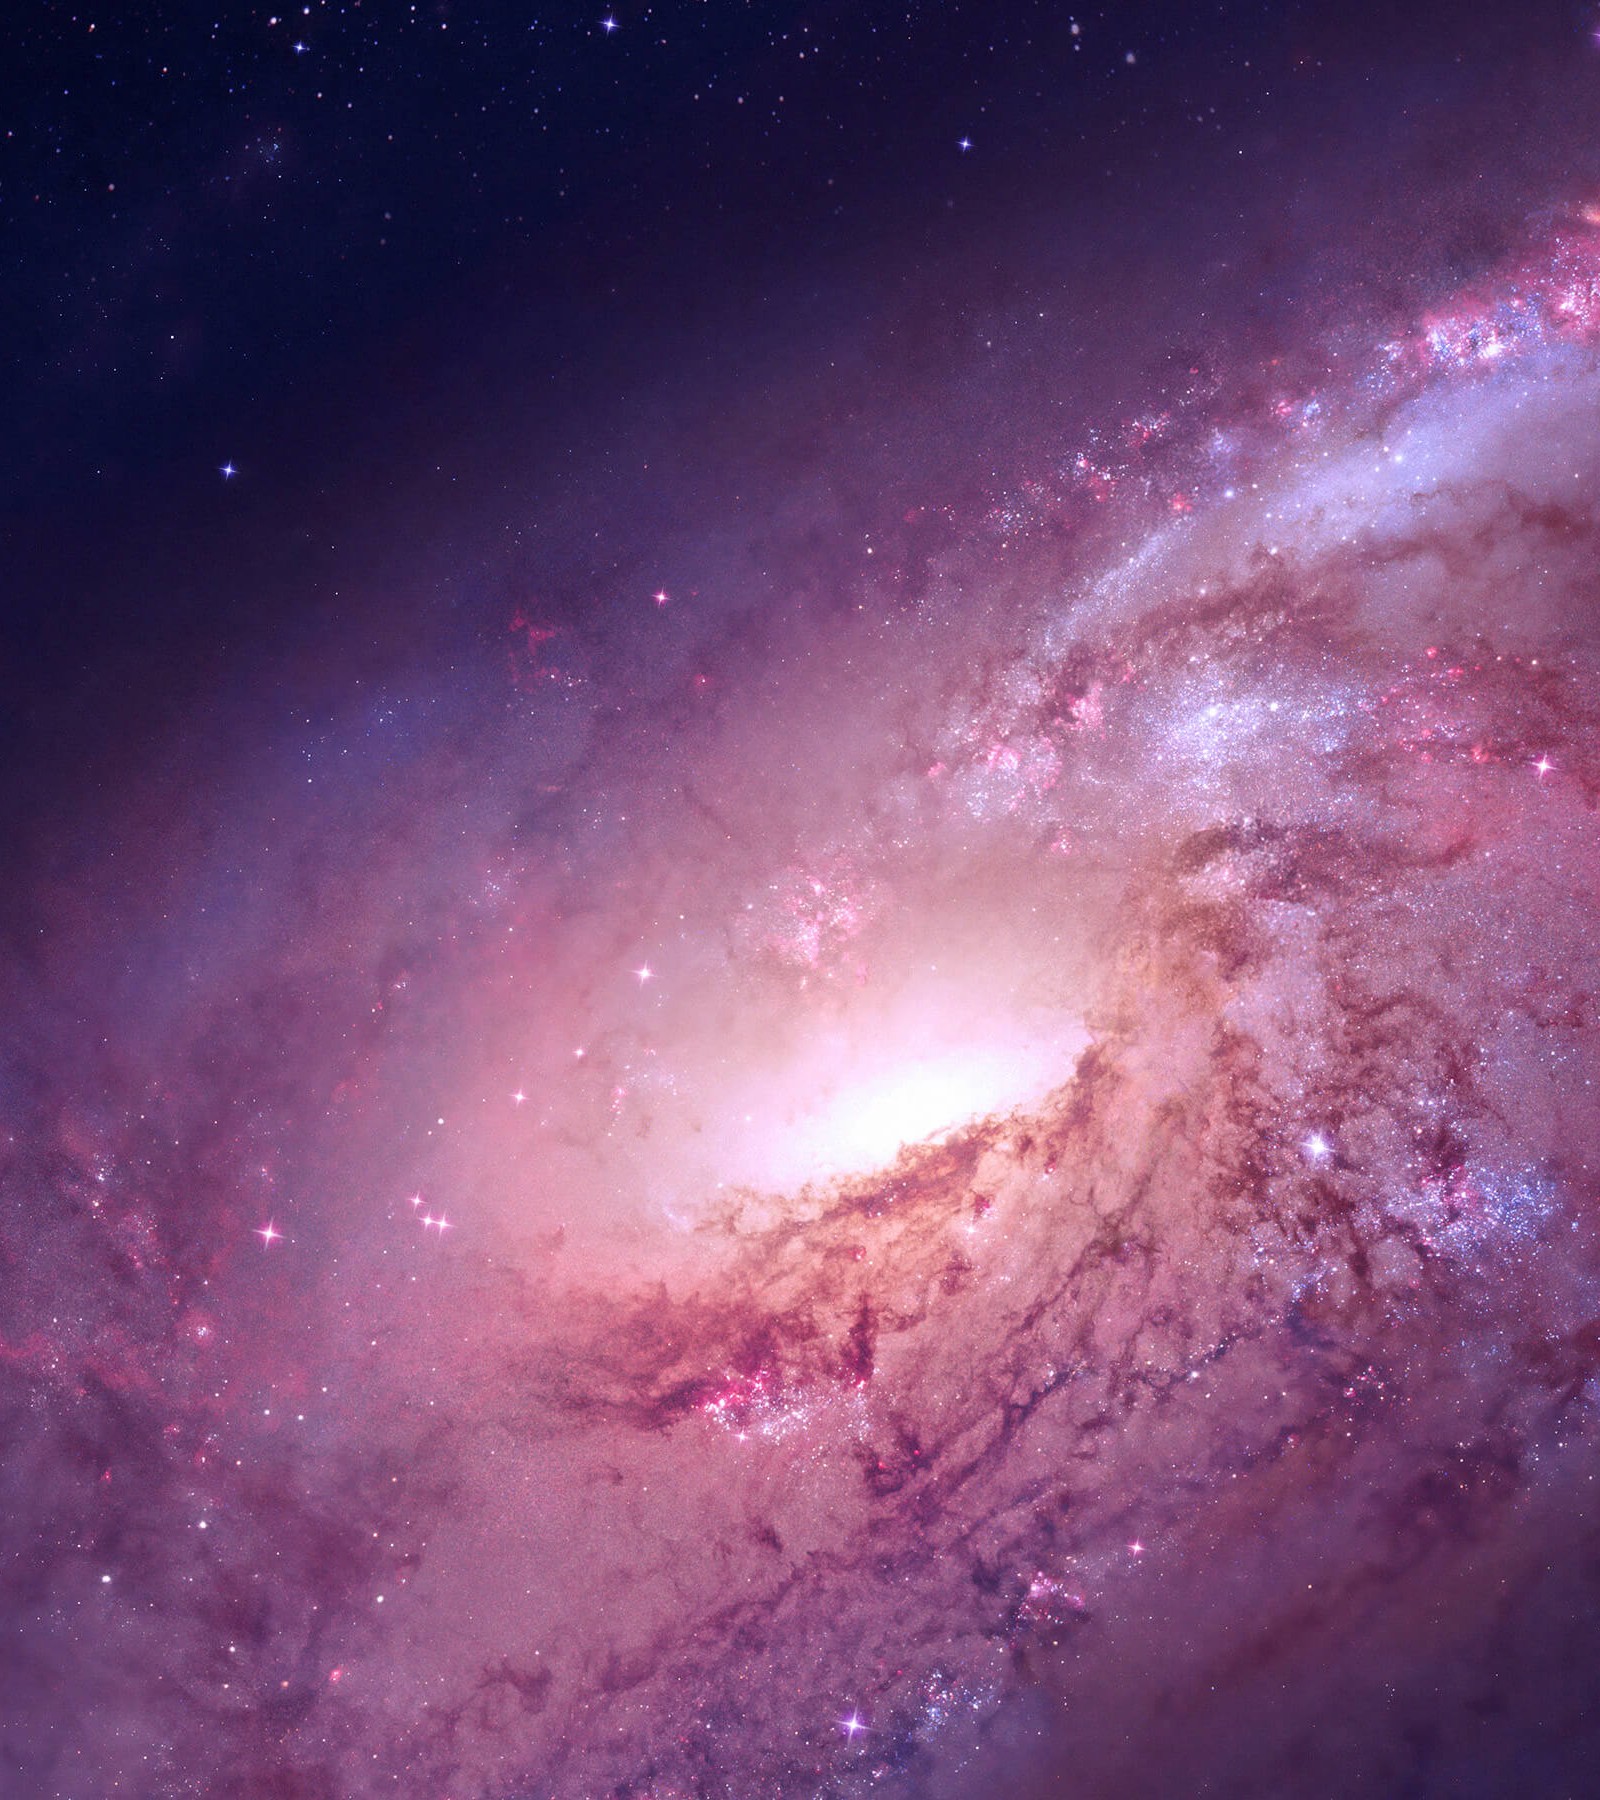 Galaxy M106 HD Wallpaper For Kindle Fire HDx